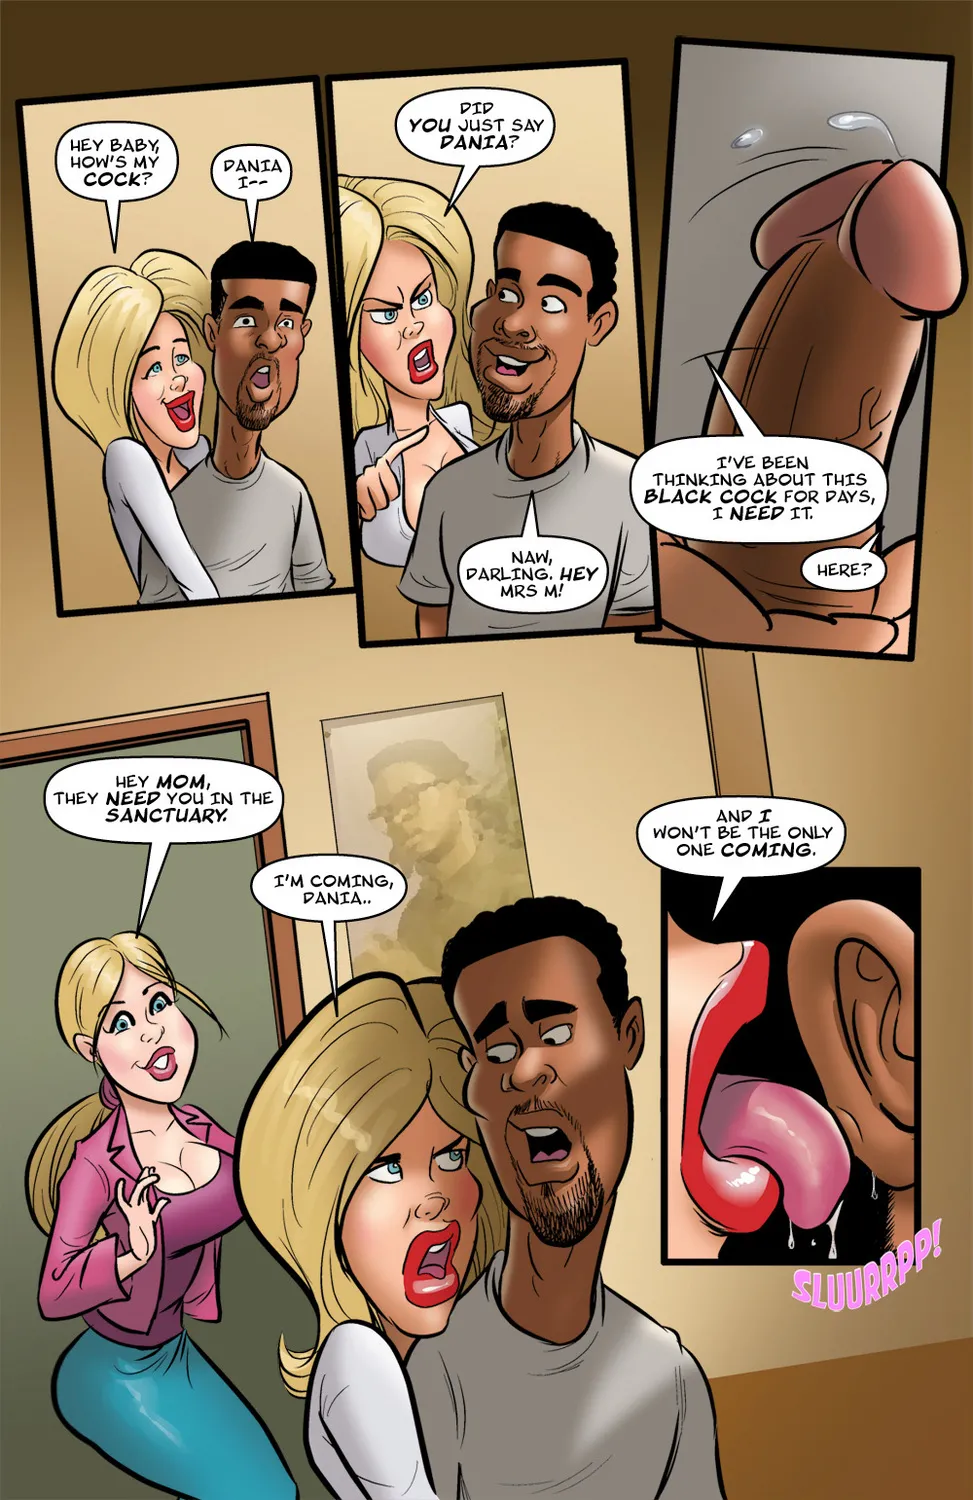 A BackDoor To Heaven 3 - Page 6